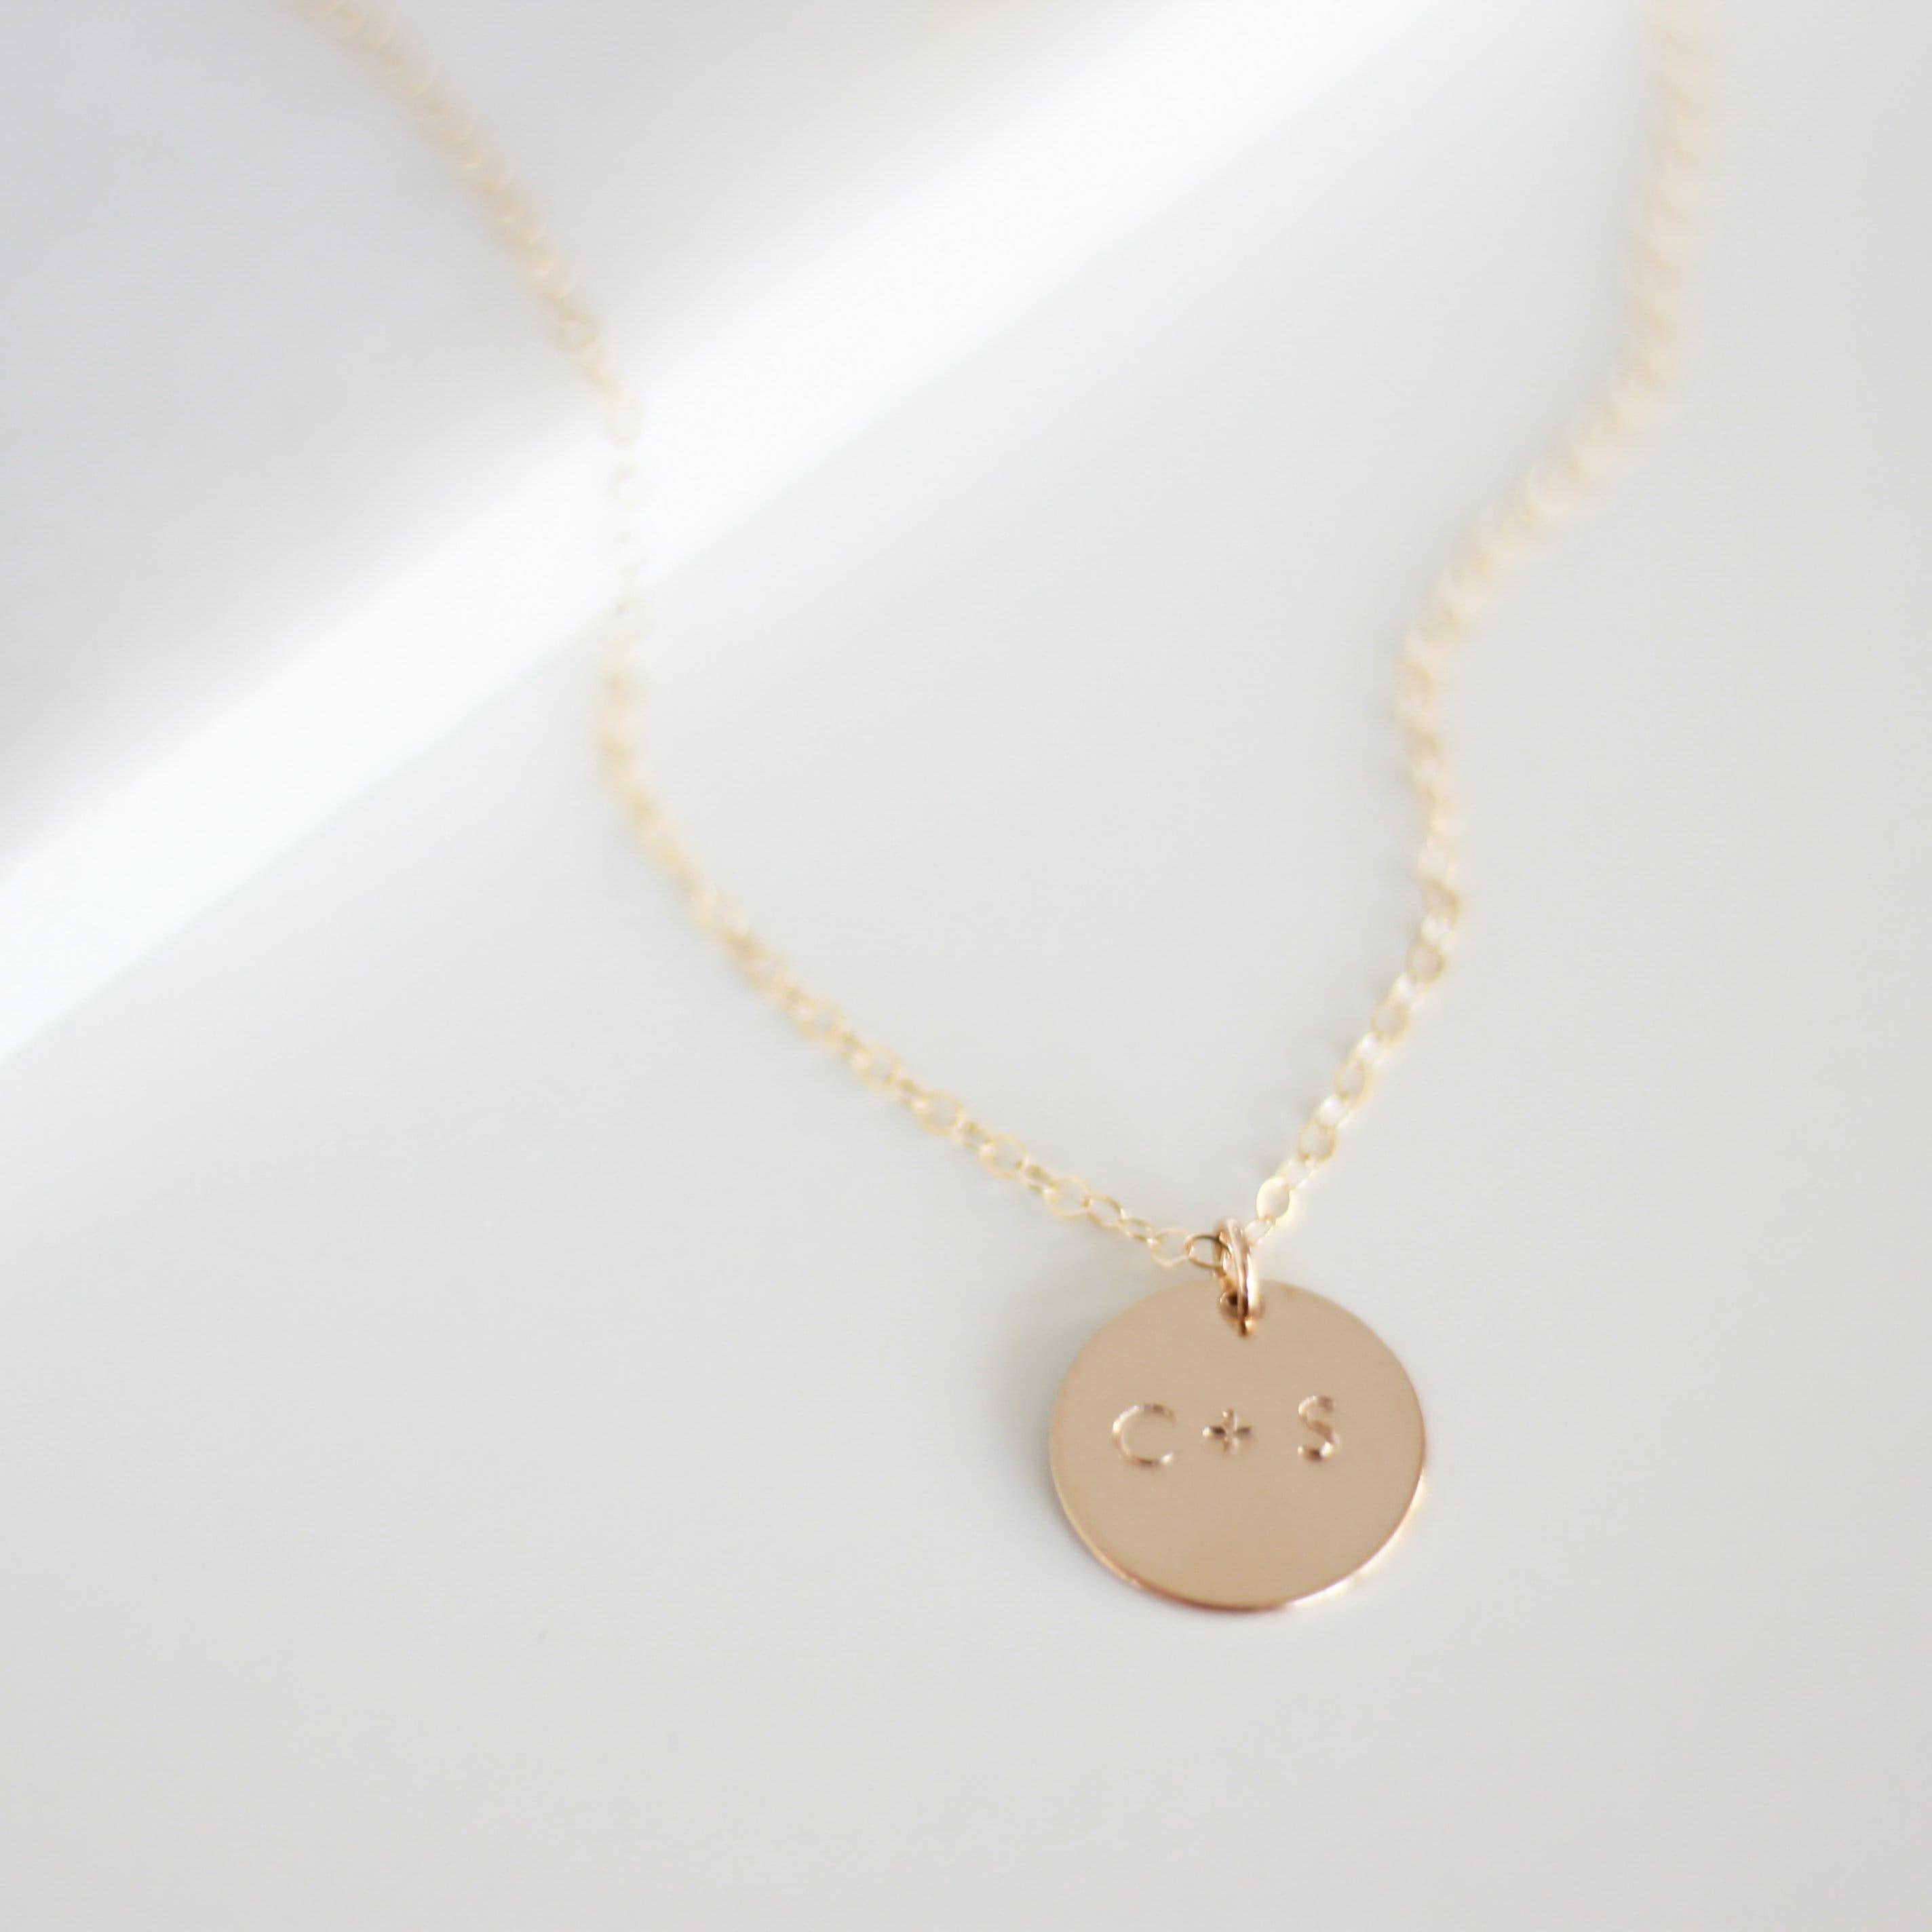 Couples Initials Necklace - Nolia Jewelry - Meaningful + Sustainably Handcrafted Jewelry